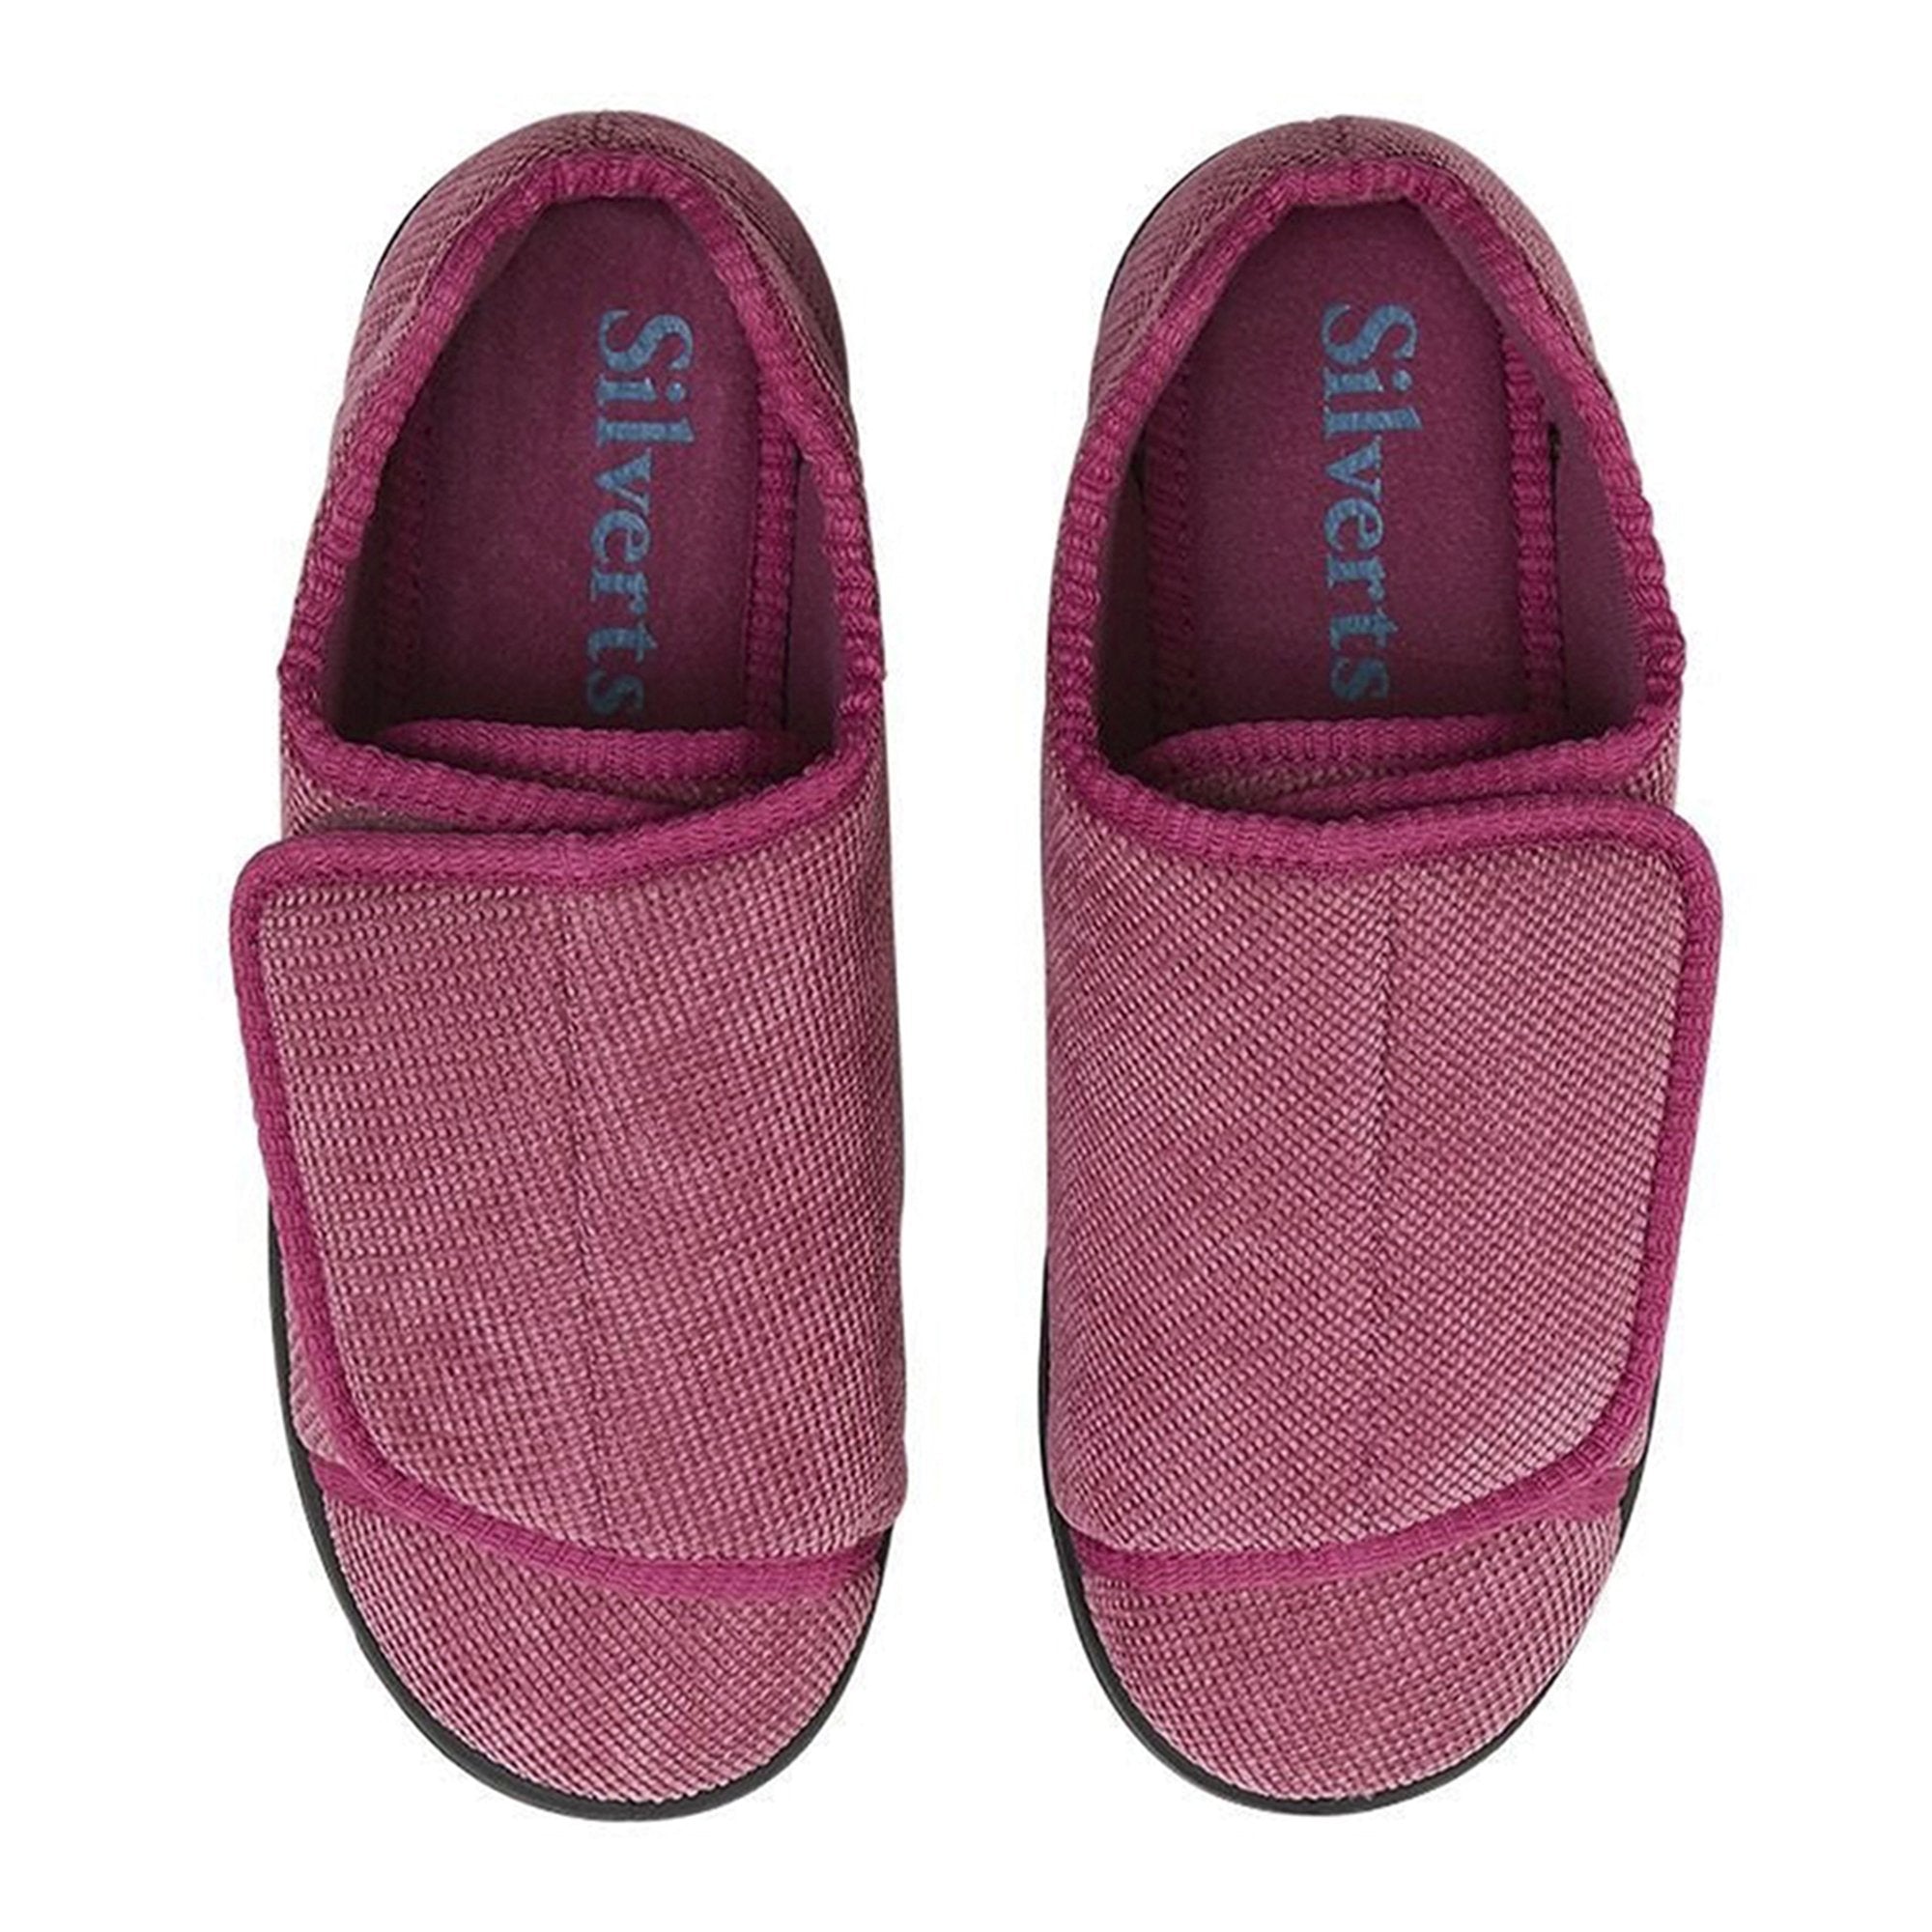 Slippers Silverts® Size 9 / 2X-Wide Dusty Rose Easy Closure